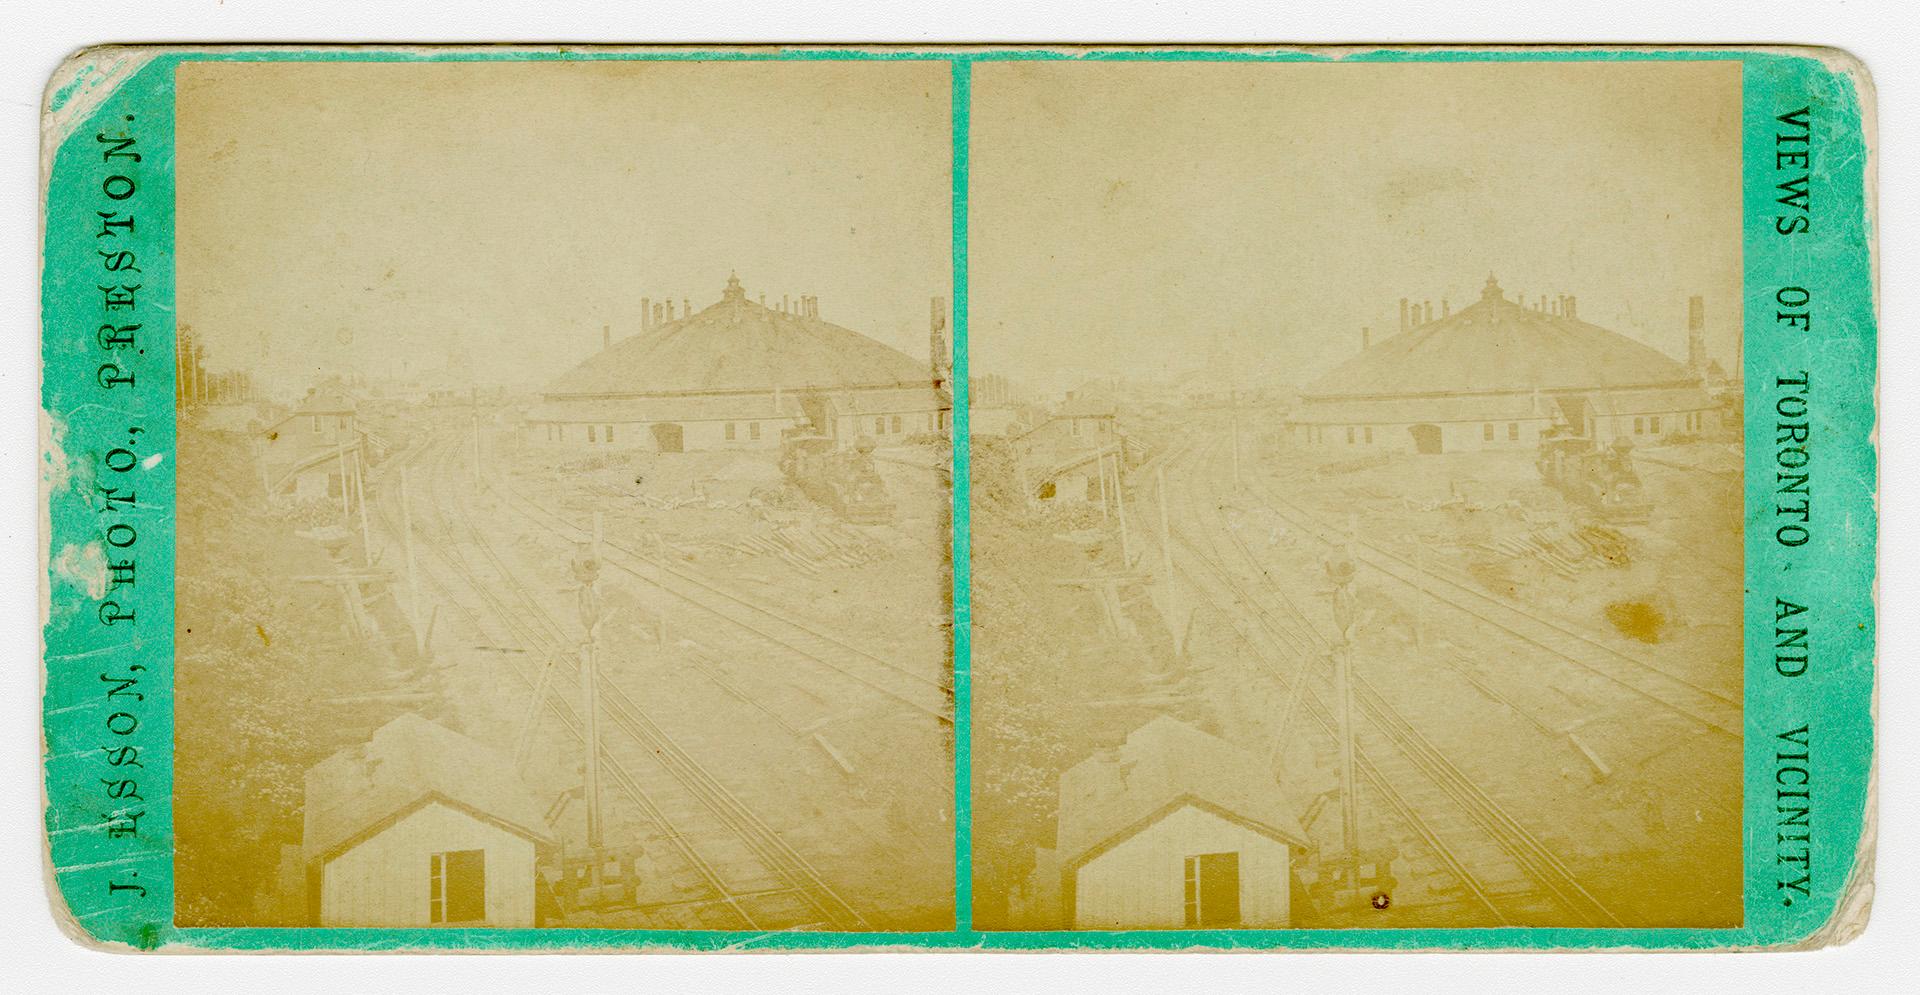 Pictures show railway tracks with a round building in the background.